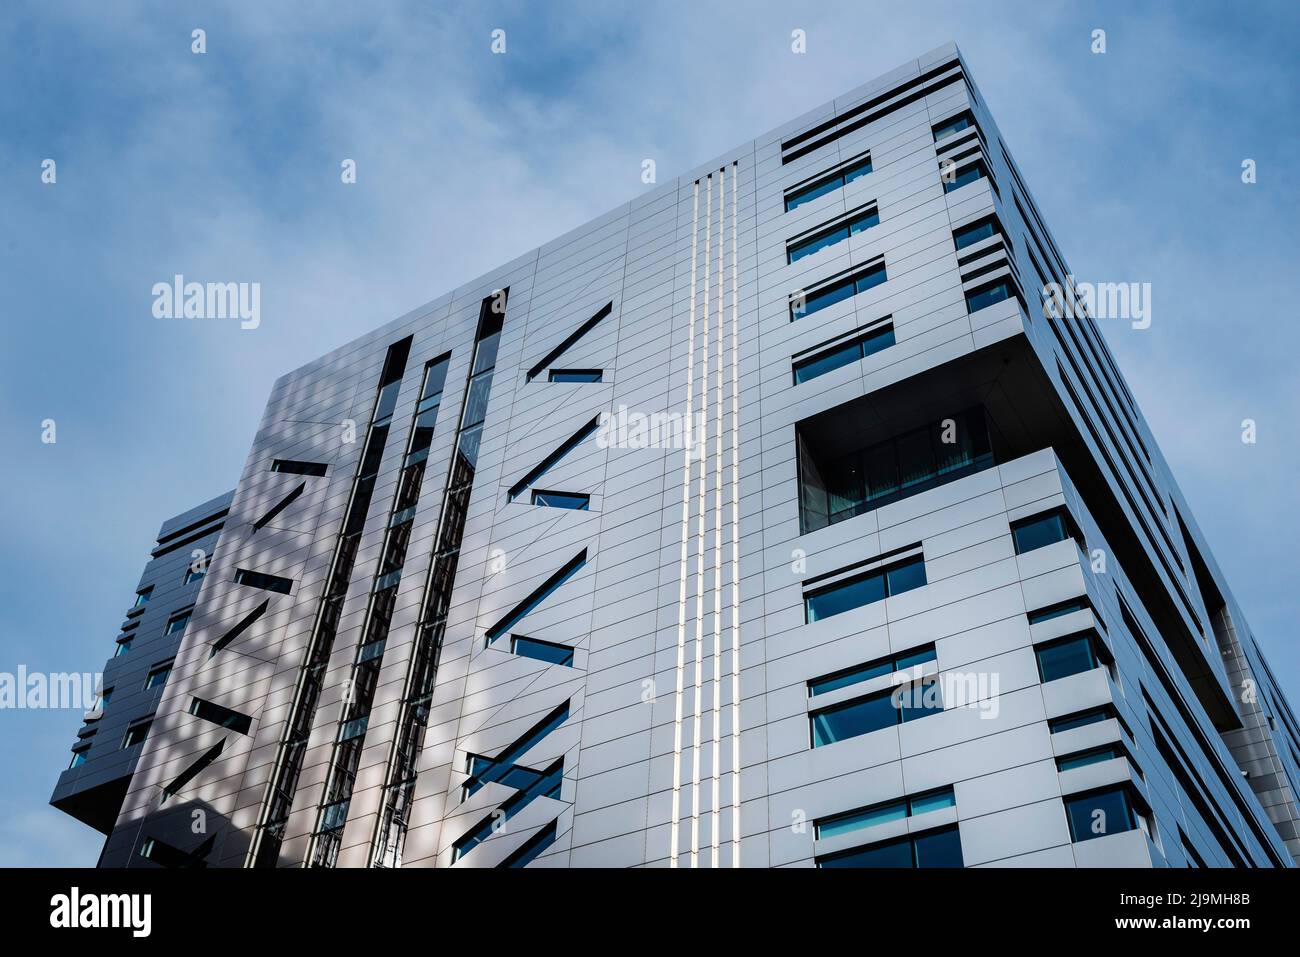 Modern architecture: Commercial real estate, stainless steel and glass office block. UBS London Stock Photo